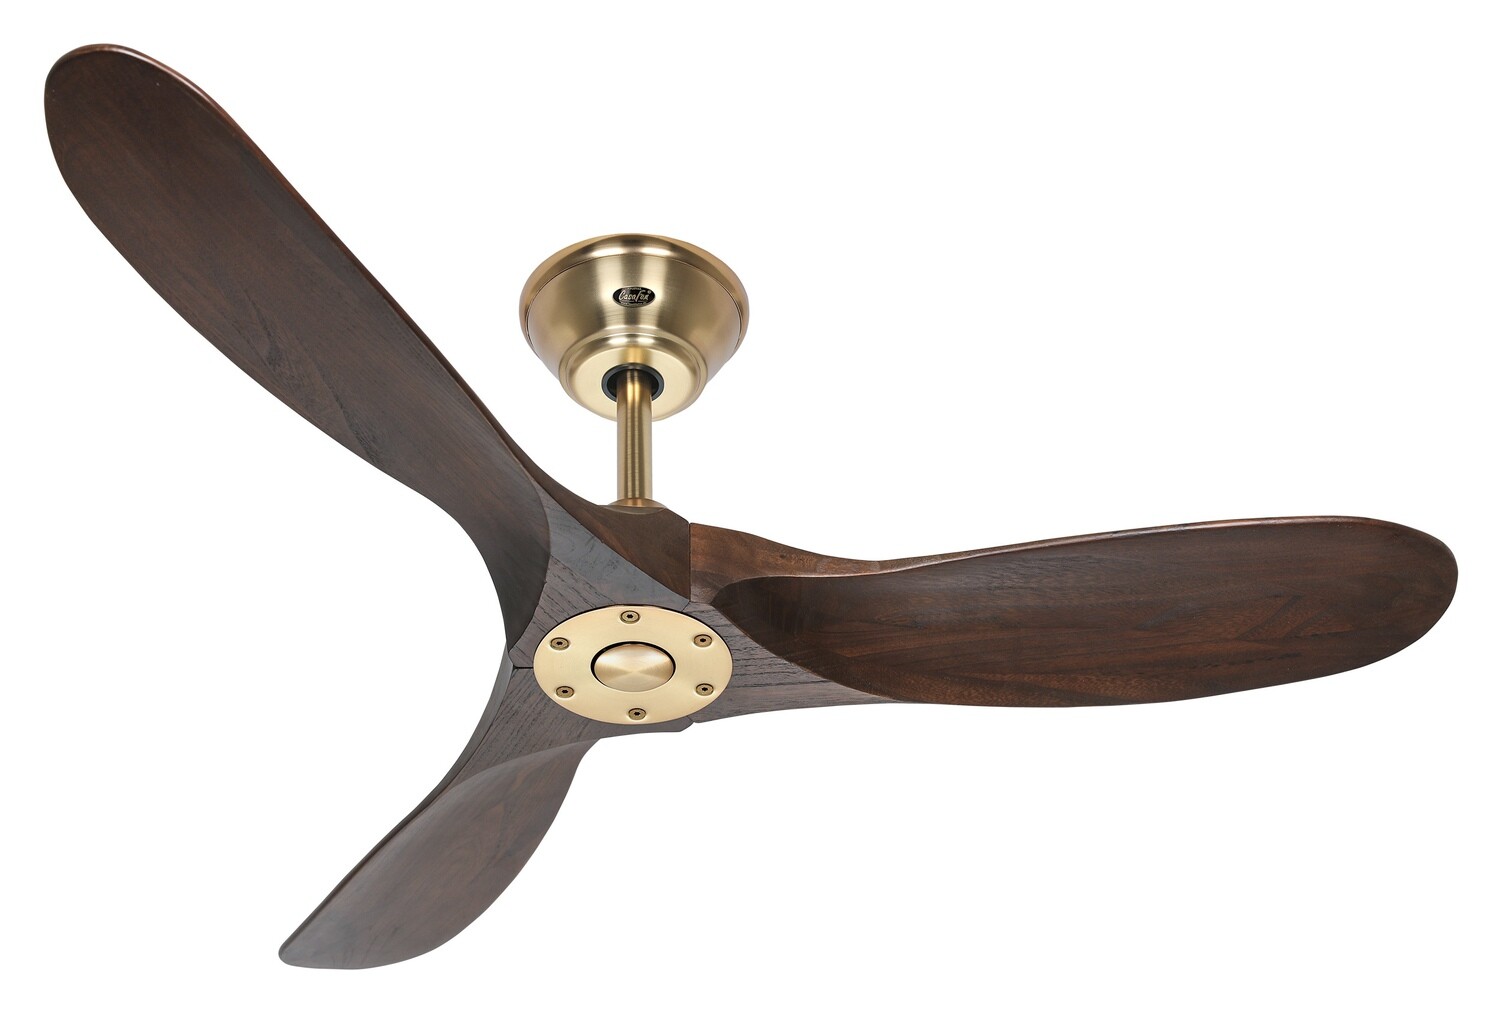 Eco Genuino 122 MG-NB energy saving ceiling fan by CASAFAN Ø122 with remote control included